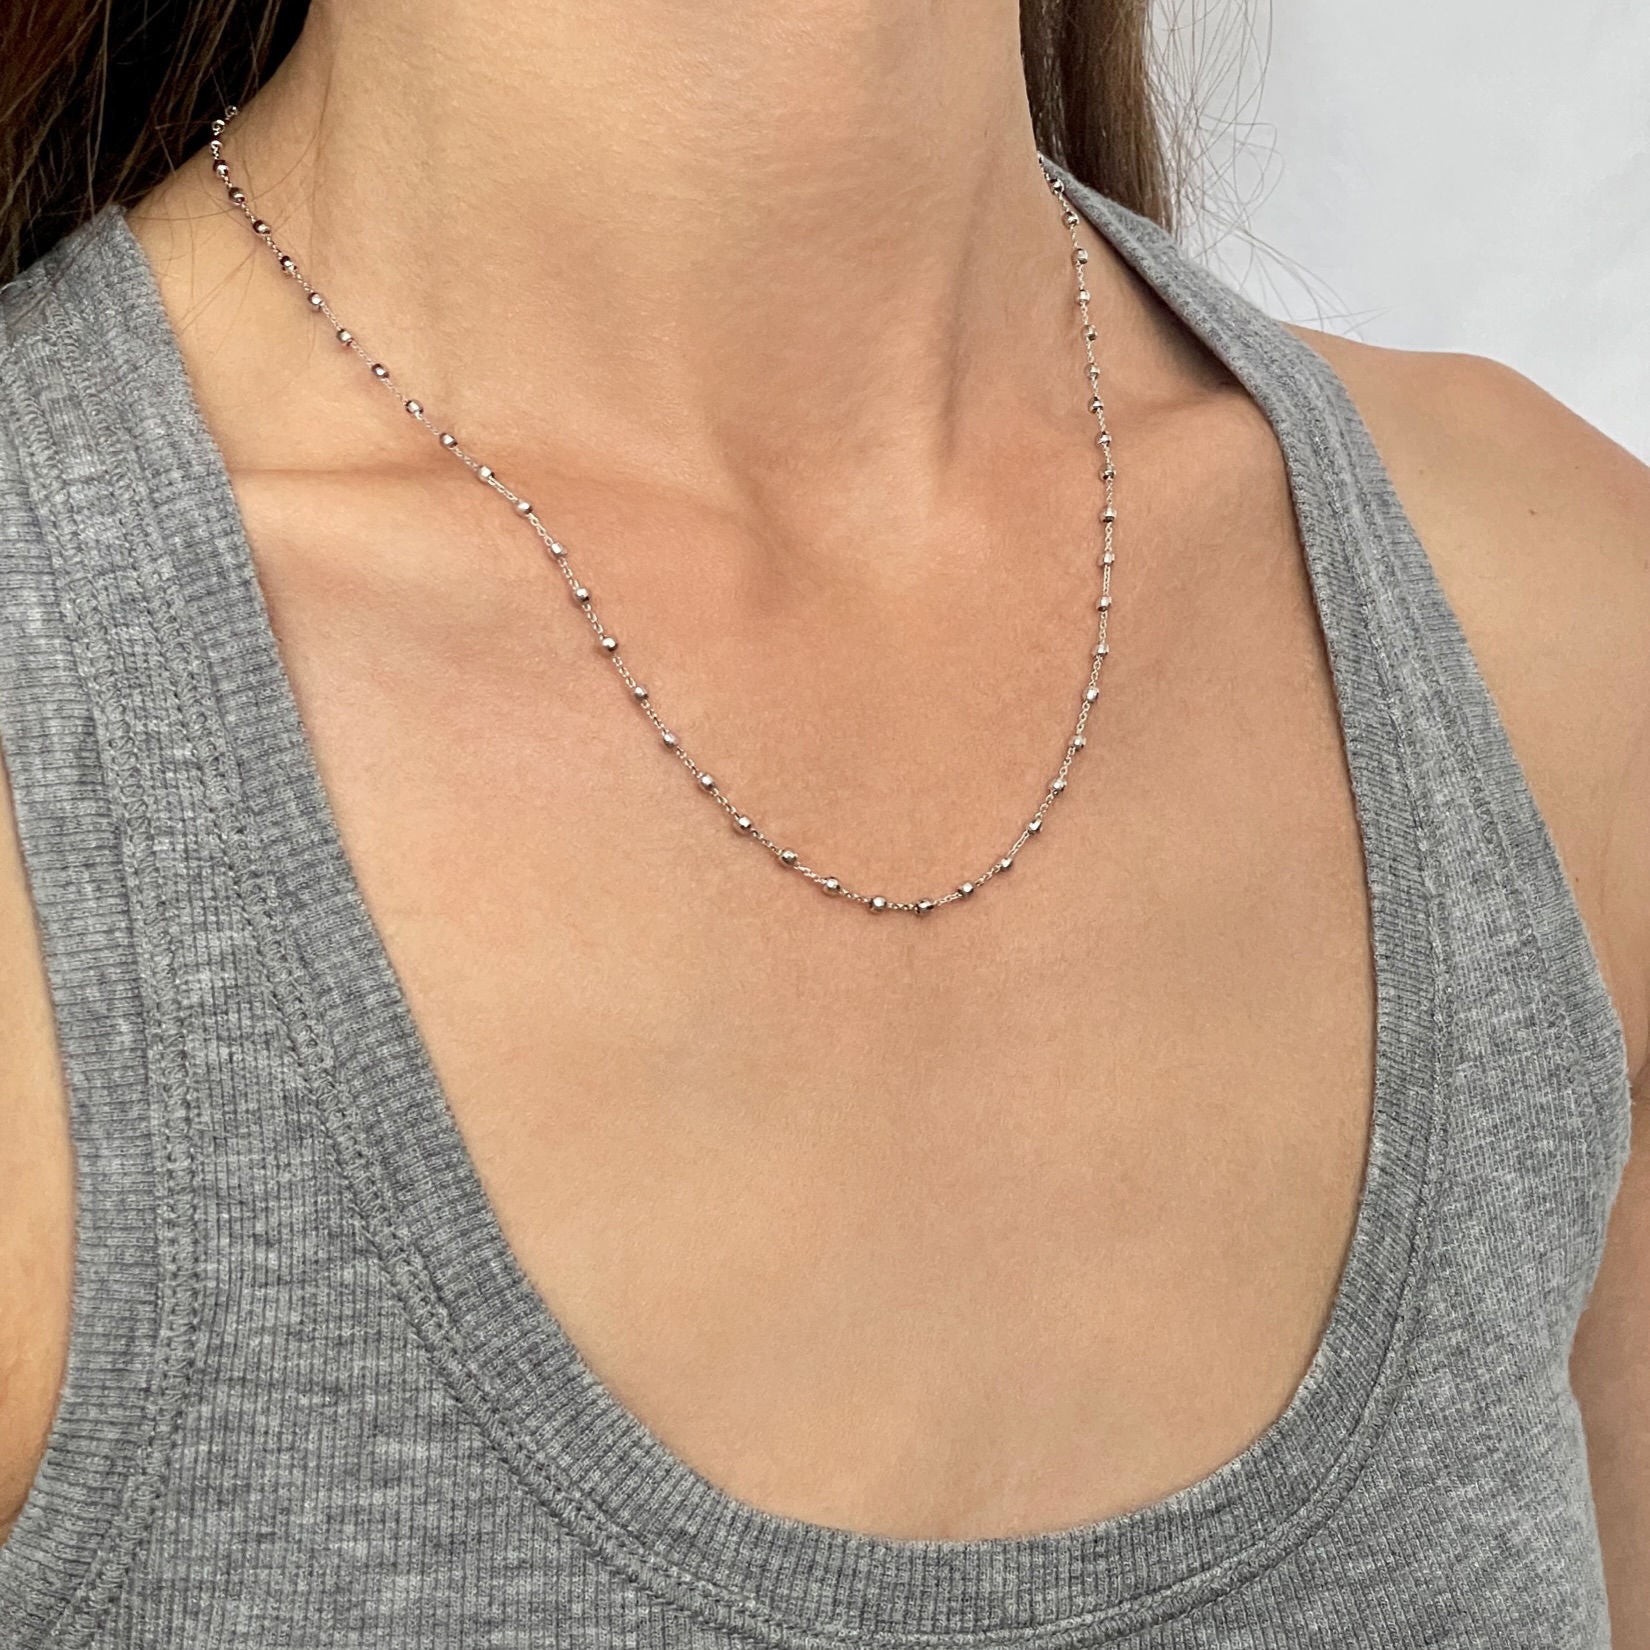 14K SOLID WHITE GOLD SATURN BEAD NECKLACE CHAIN WOMEN